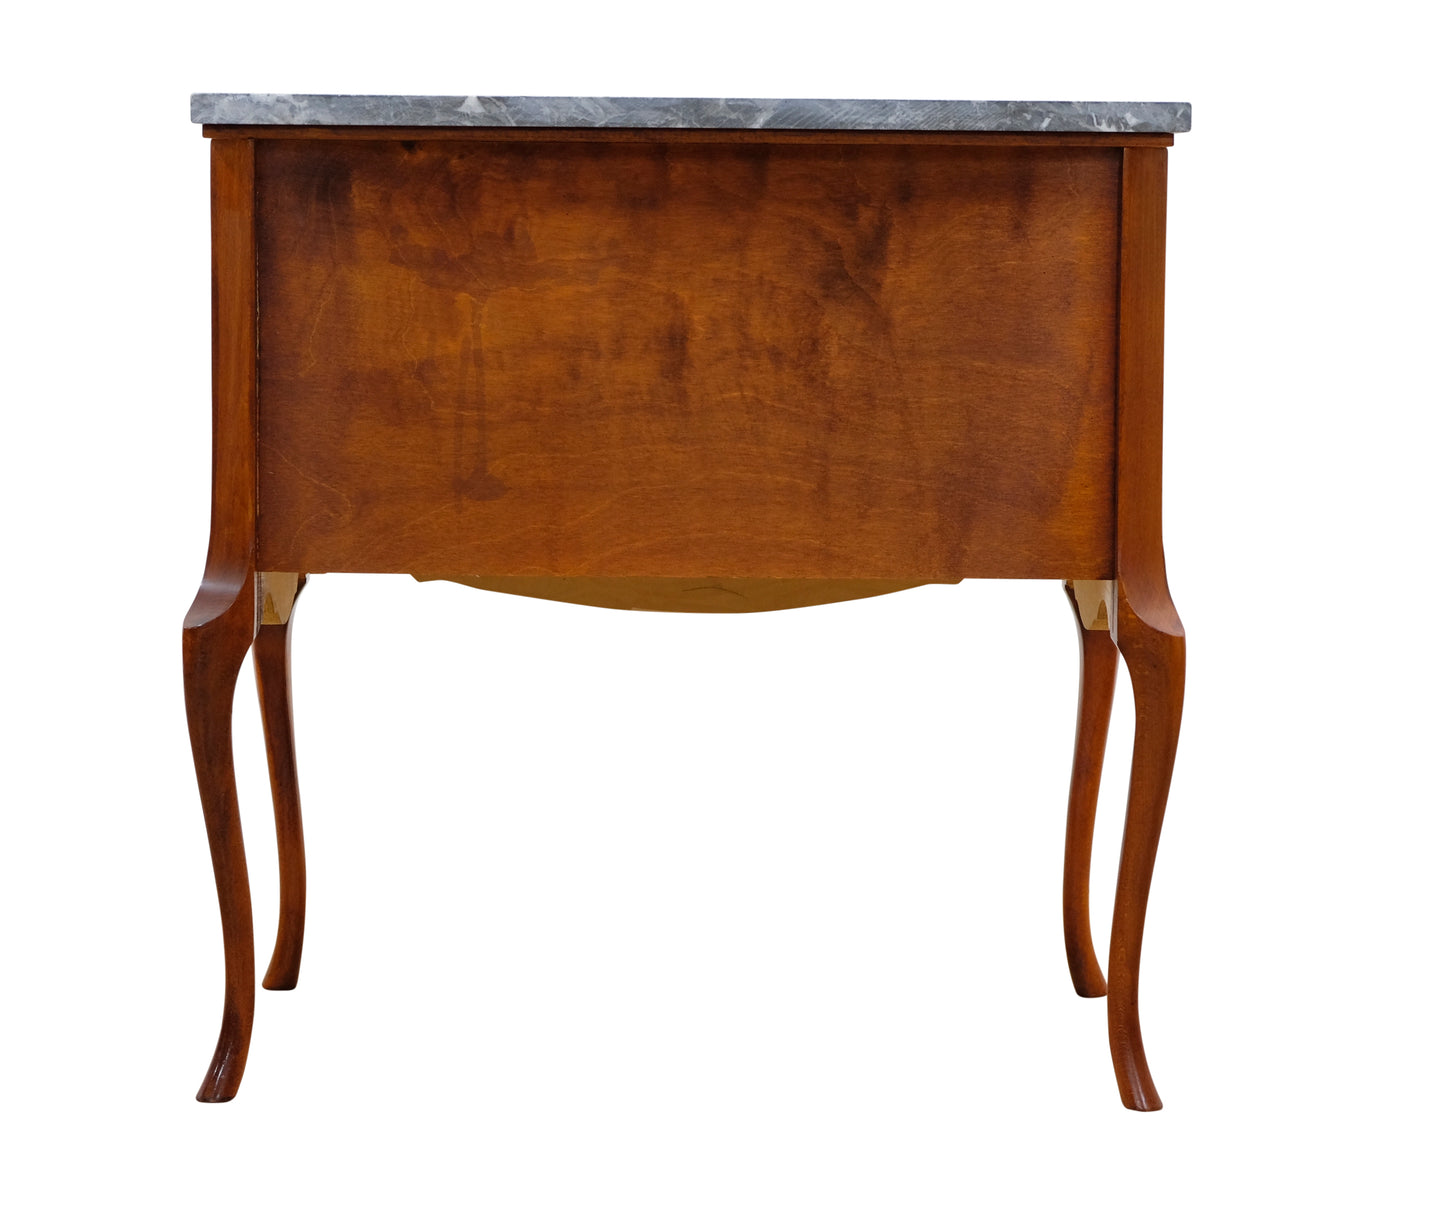 Gustavian Style Commode with natural marble top and Chinoiserie Design